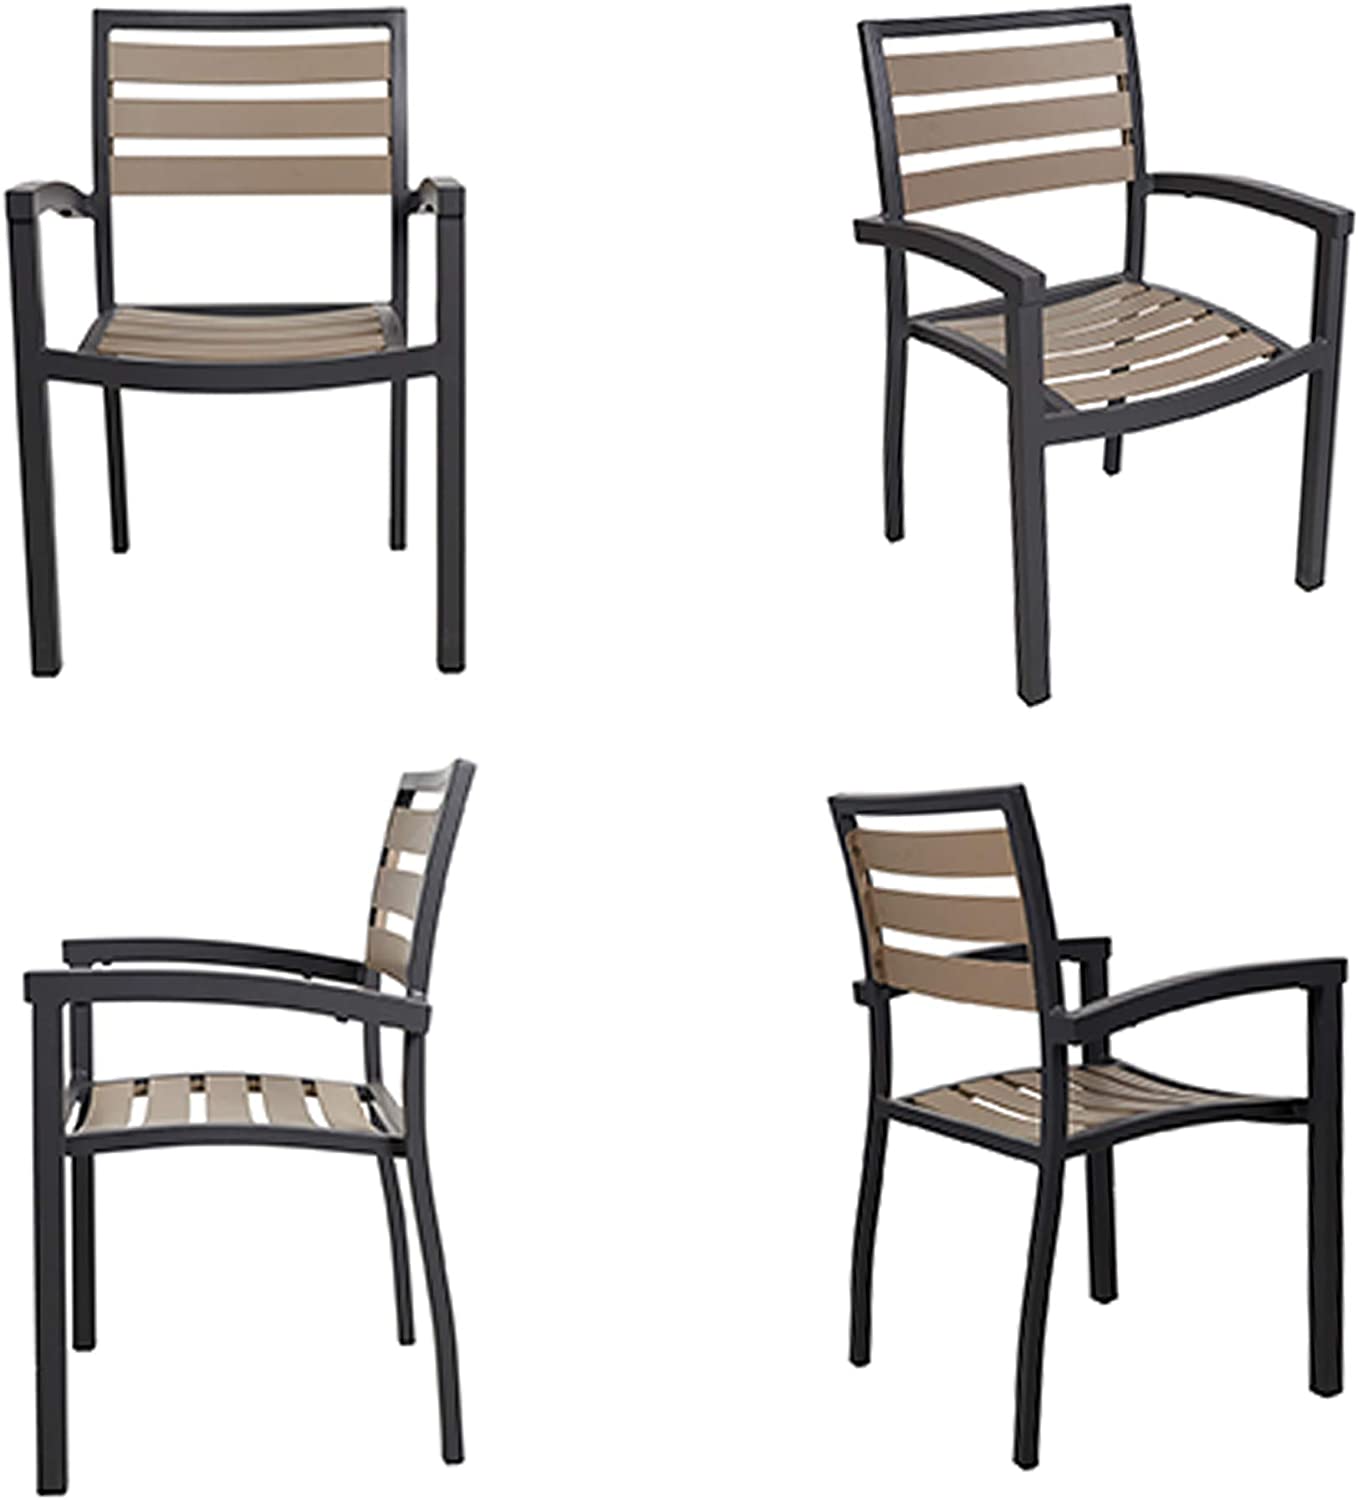 Set of 4 Patio Chairs Outdoor Dining Chair Stackable Armchair Aluminum Alloy Lightweight & Heavy Duty